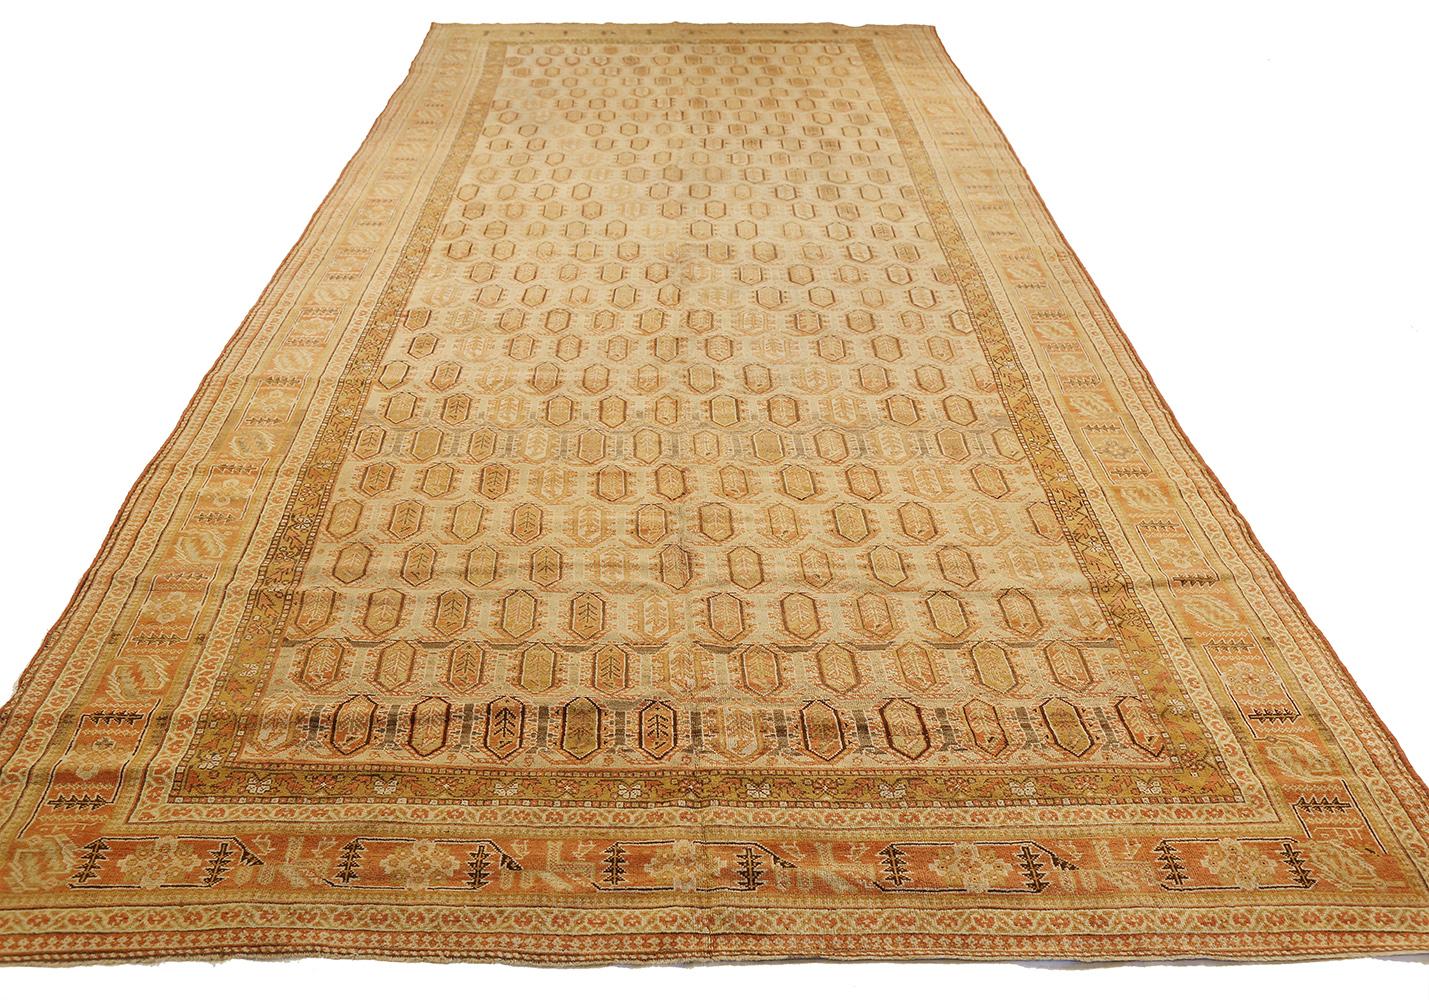 Antique Persian rug handwoven from the finest sheep’s wool and colored with all-natural vegetable dyes that are safe for humans and pets. It’s a traditional Shiraz design featuring orange and brown geometric details over an ivory field. It’s a